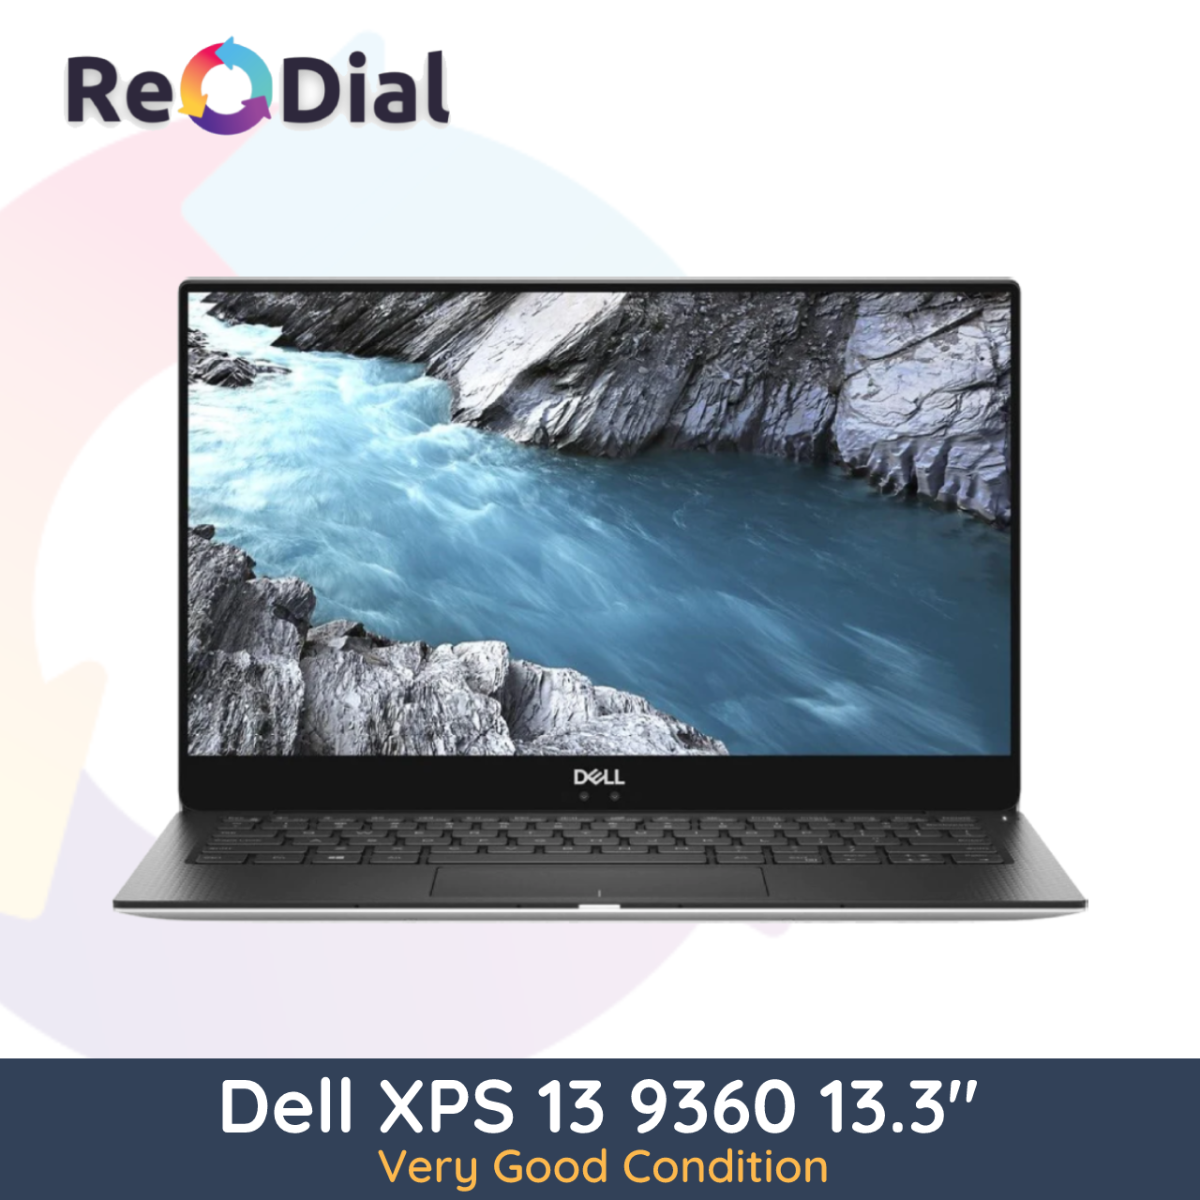 Dell XPS 13 9360 13.3" 256Gb 8Gb Ram - Wins 10 pro - Very Good Condition